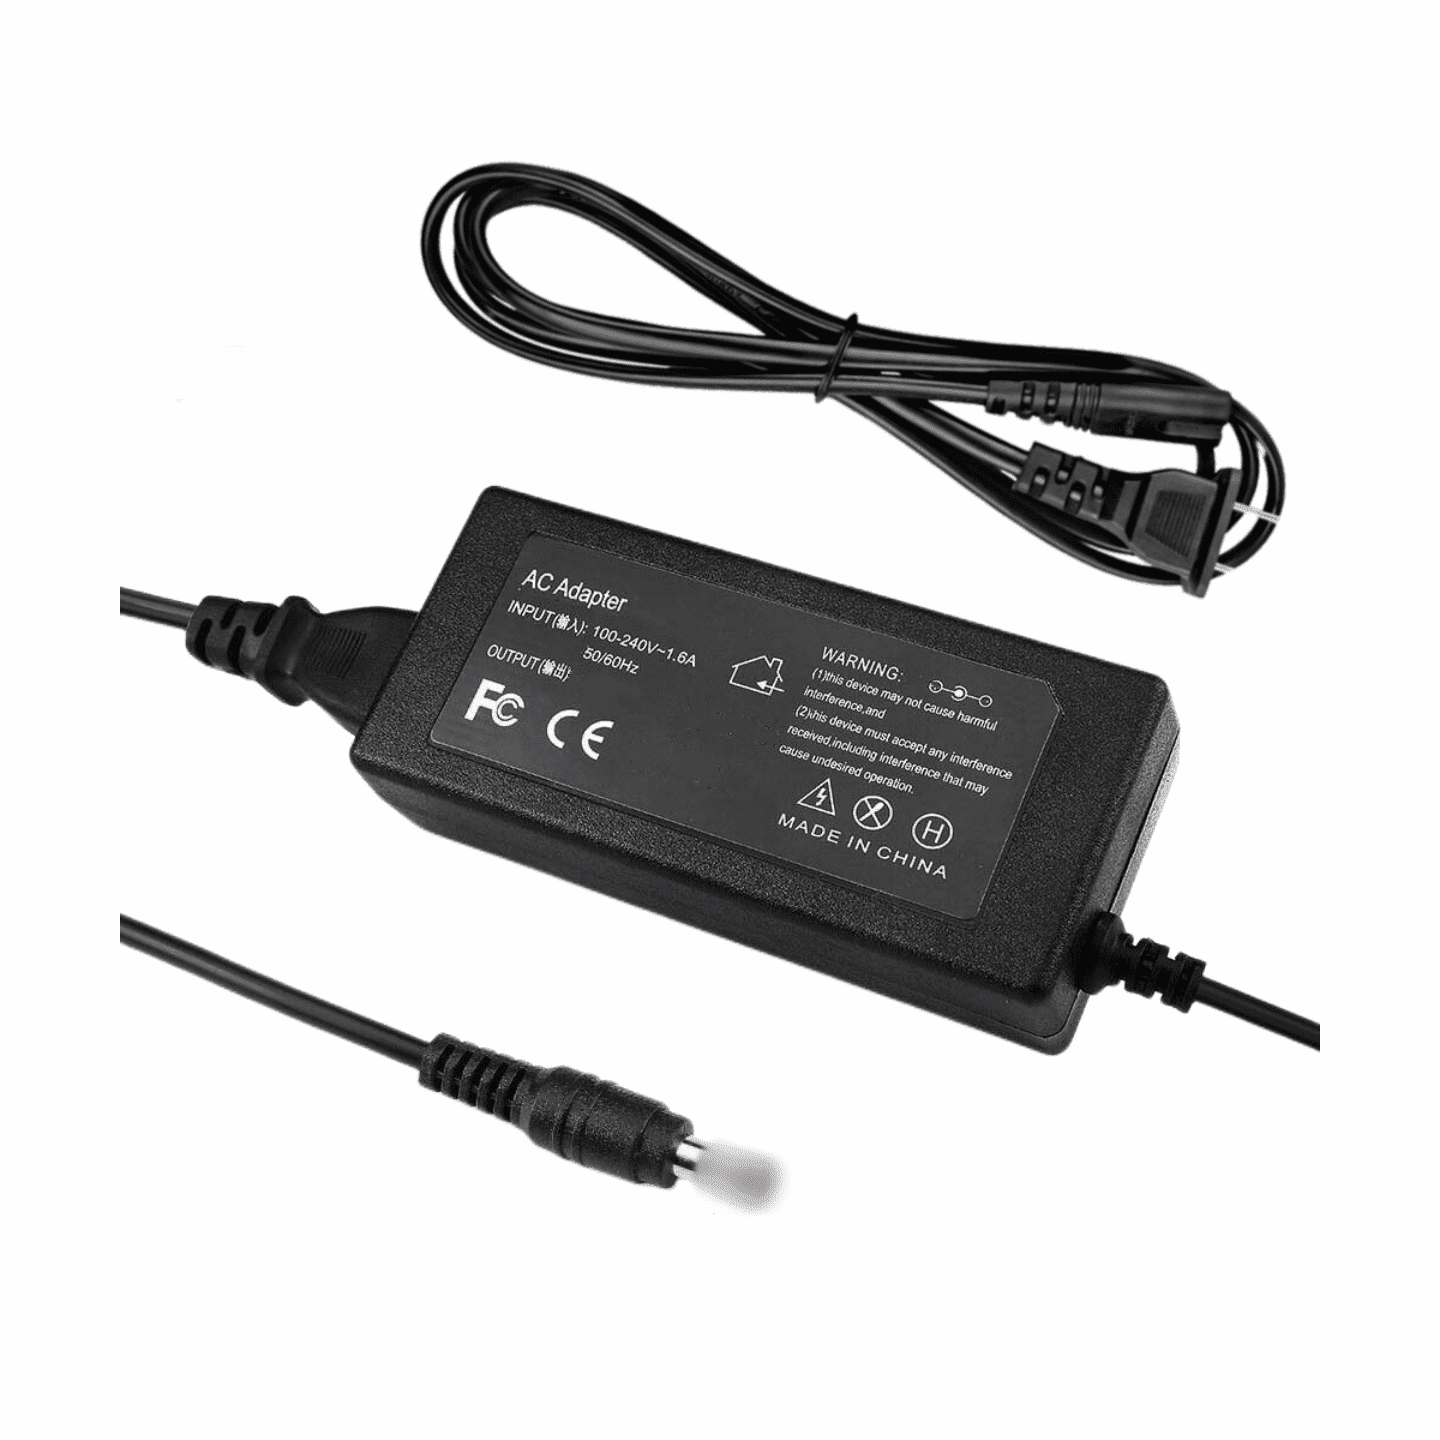 19V AC/DC Adapter Battery Charger for Compaq Presario 1200XL101, 1200XL102, 1200XL110, 1200XL111, 1200XL505, 1200Z, 1200XL526 Laptop Notebook PC 19VDC Power Supply Cord Cable -